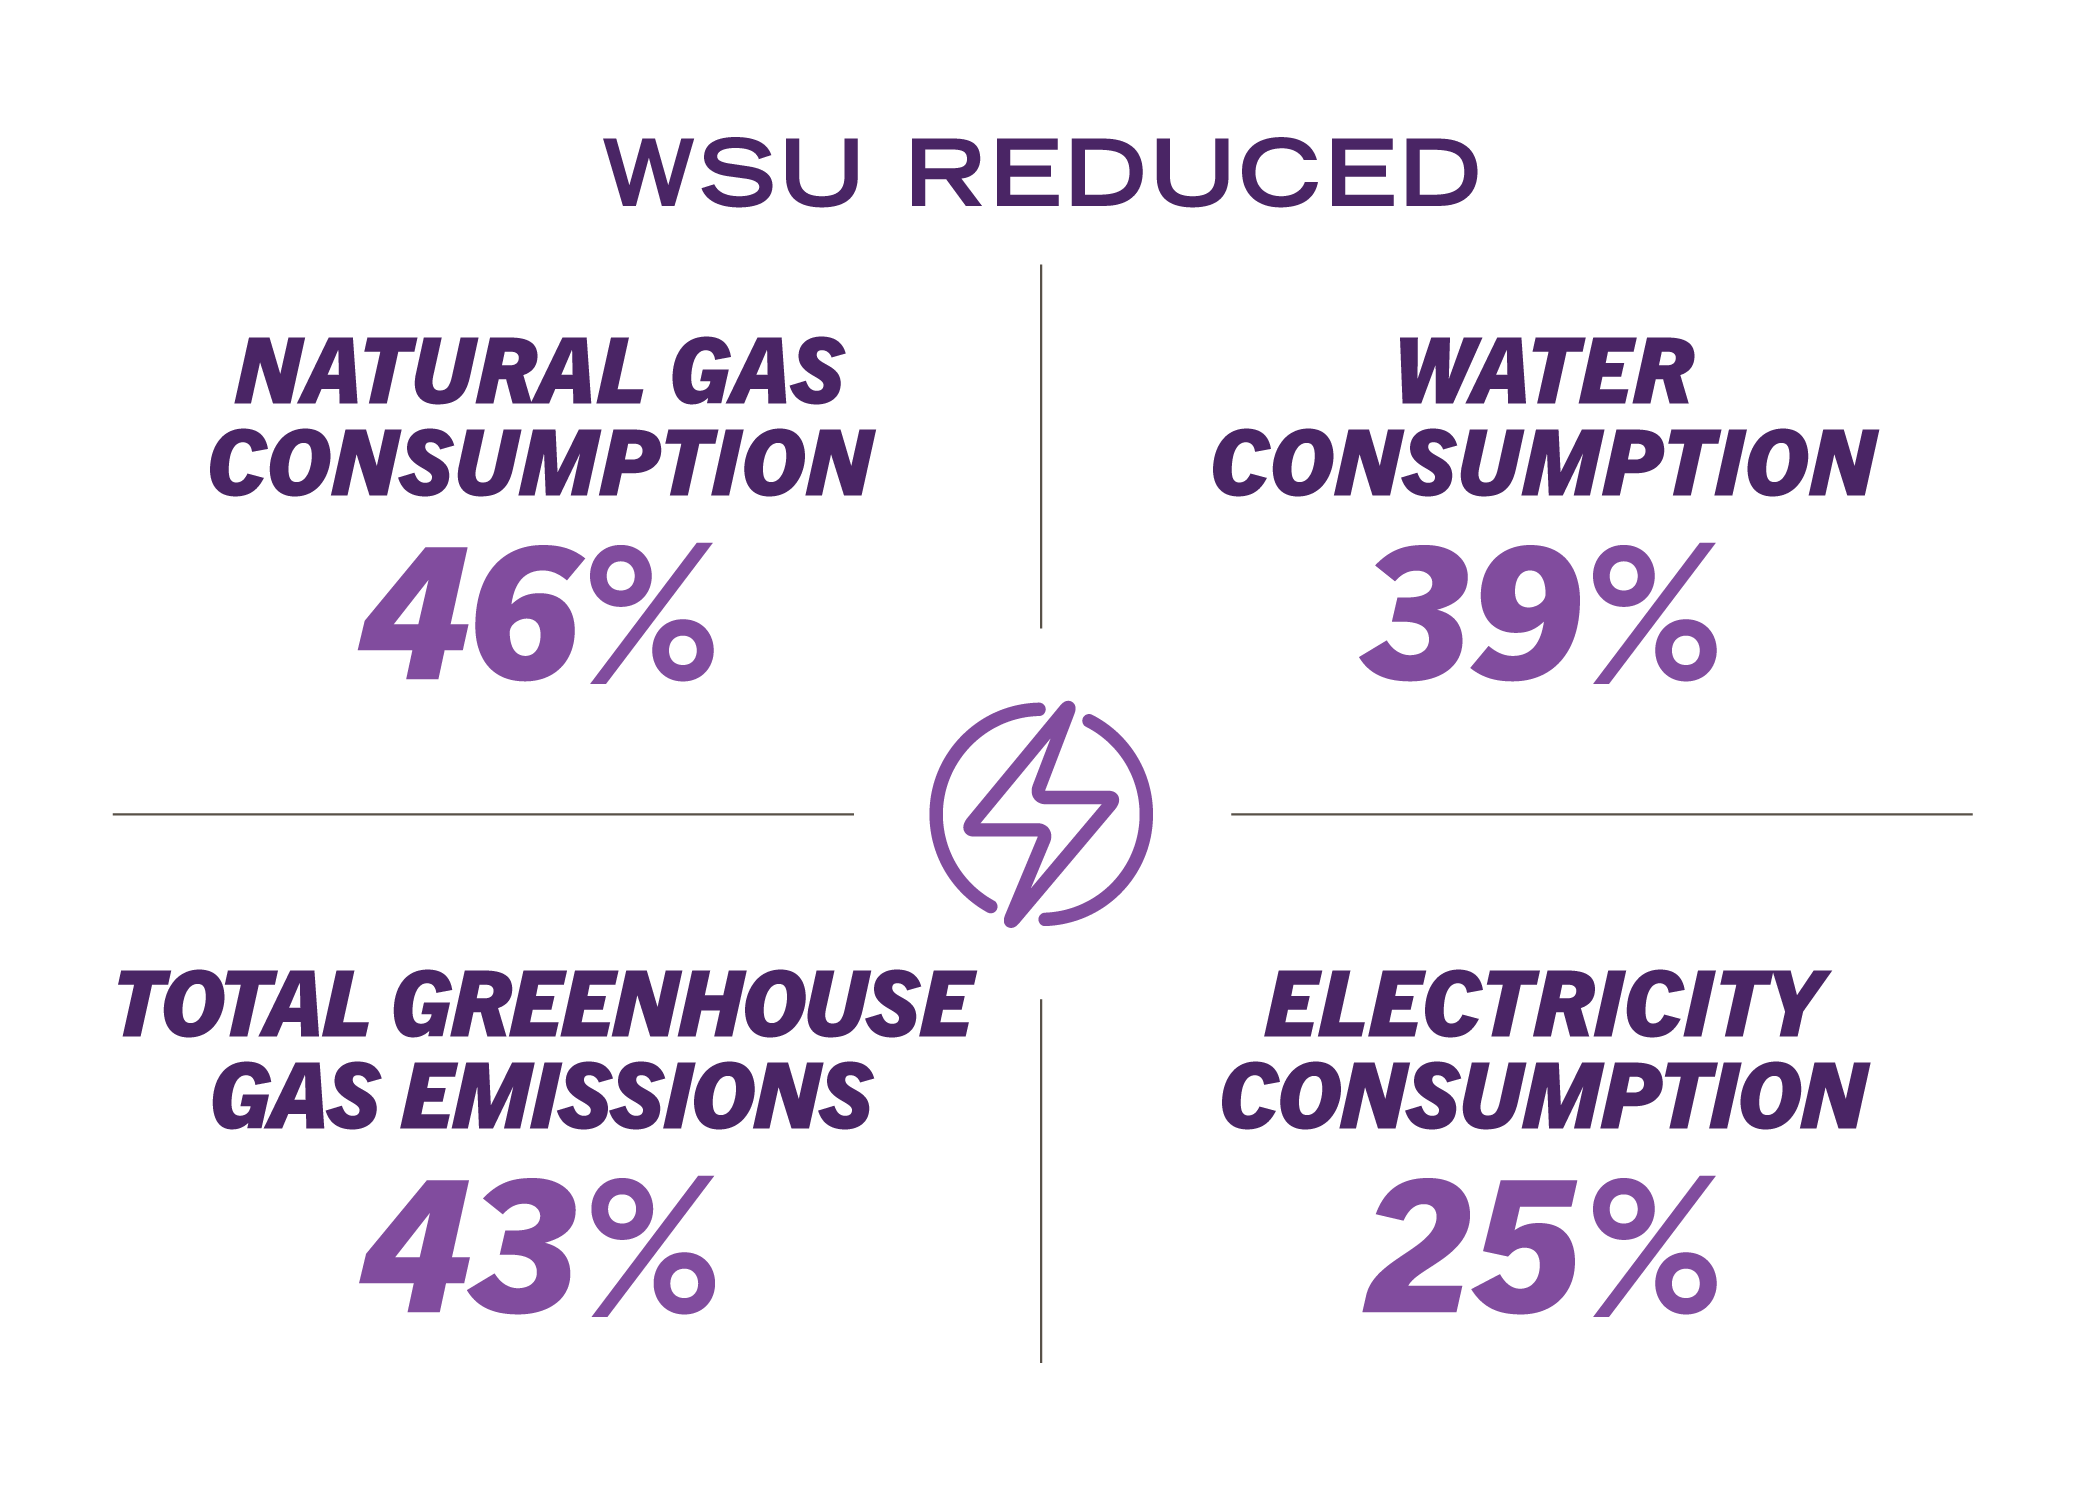 WSU has reduced natural gas, electricity and water consumption. Greenhouse gas emissions are also down.